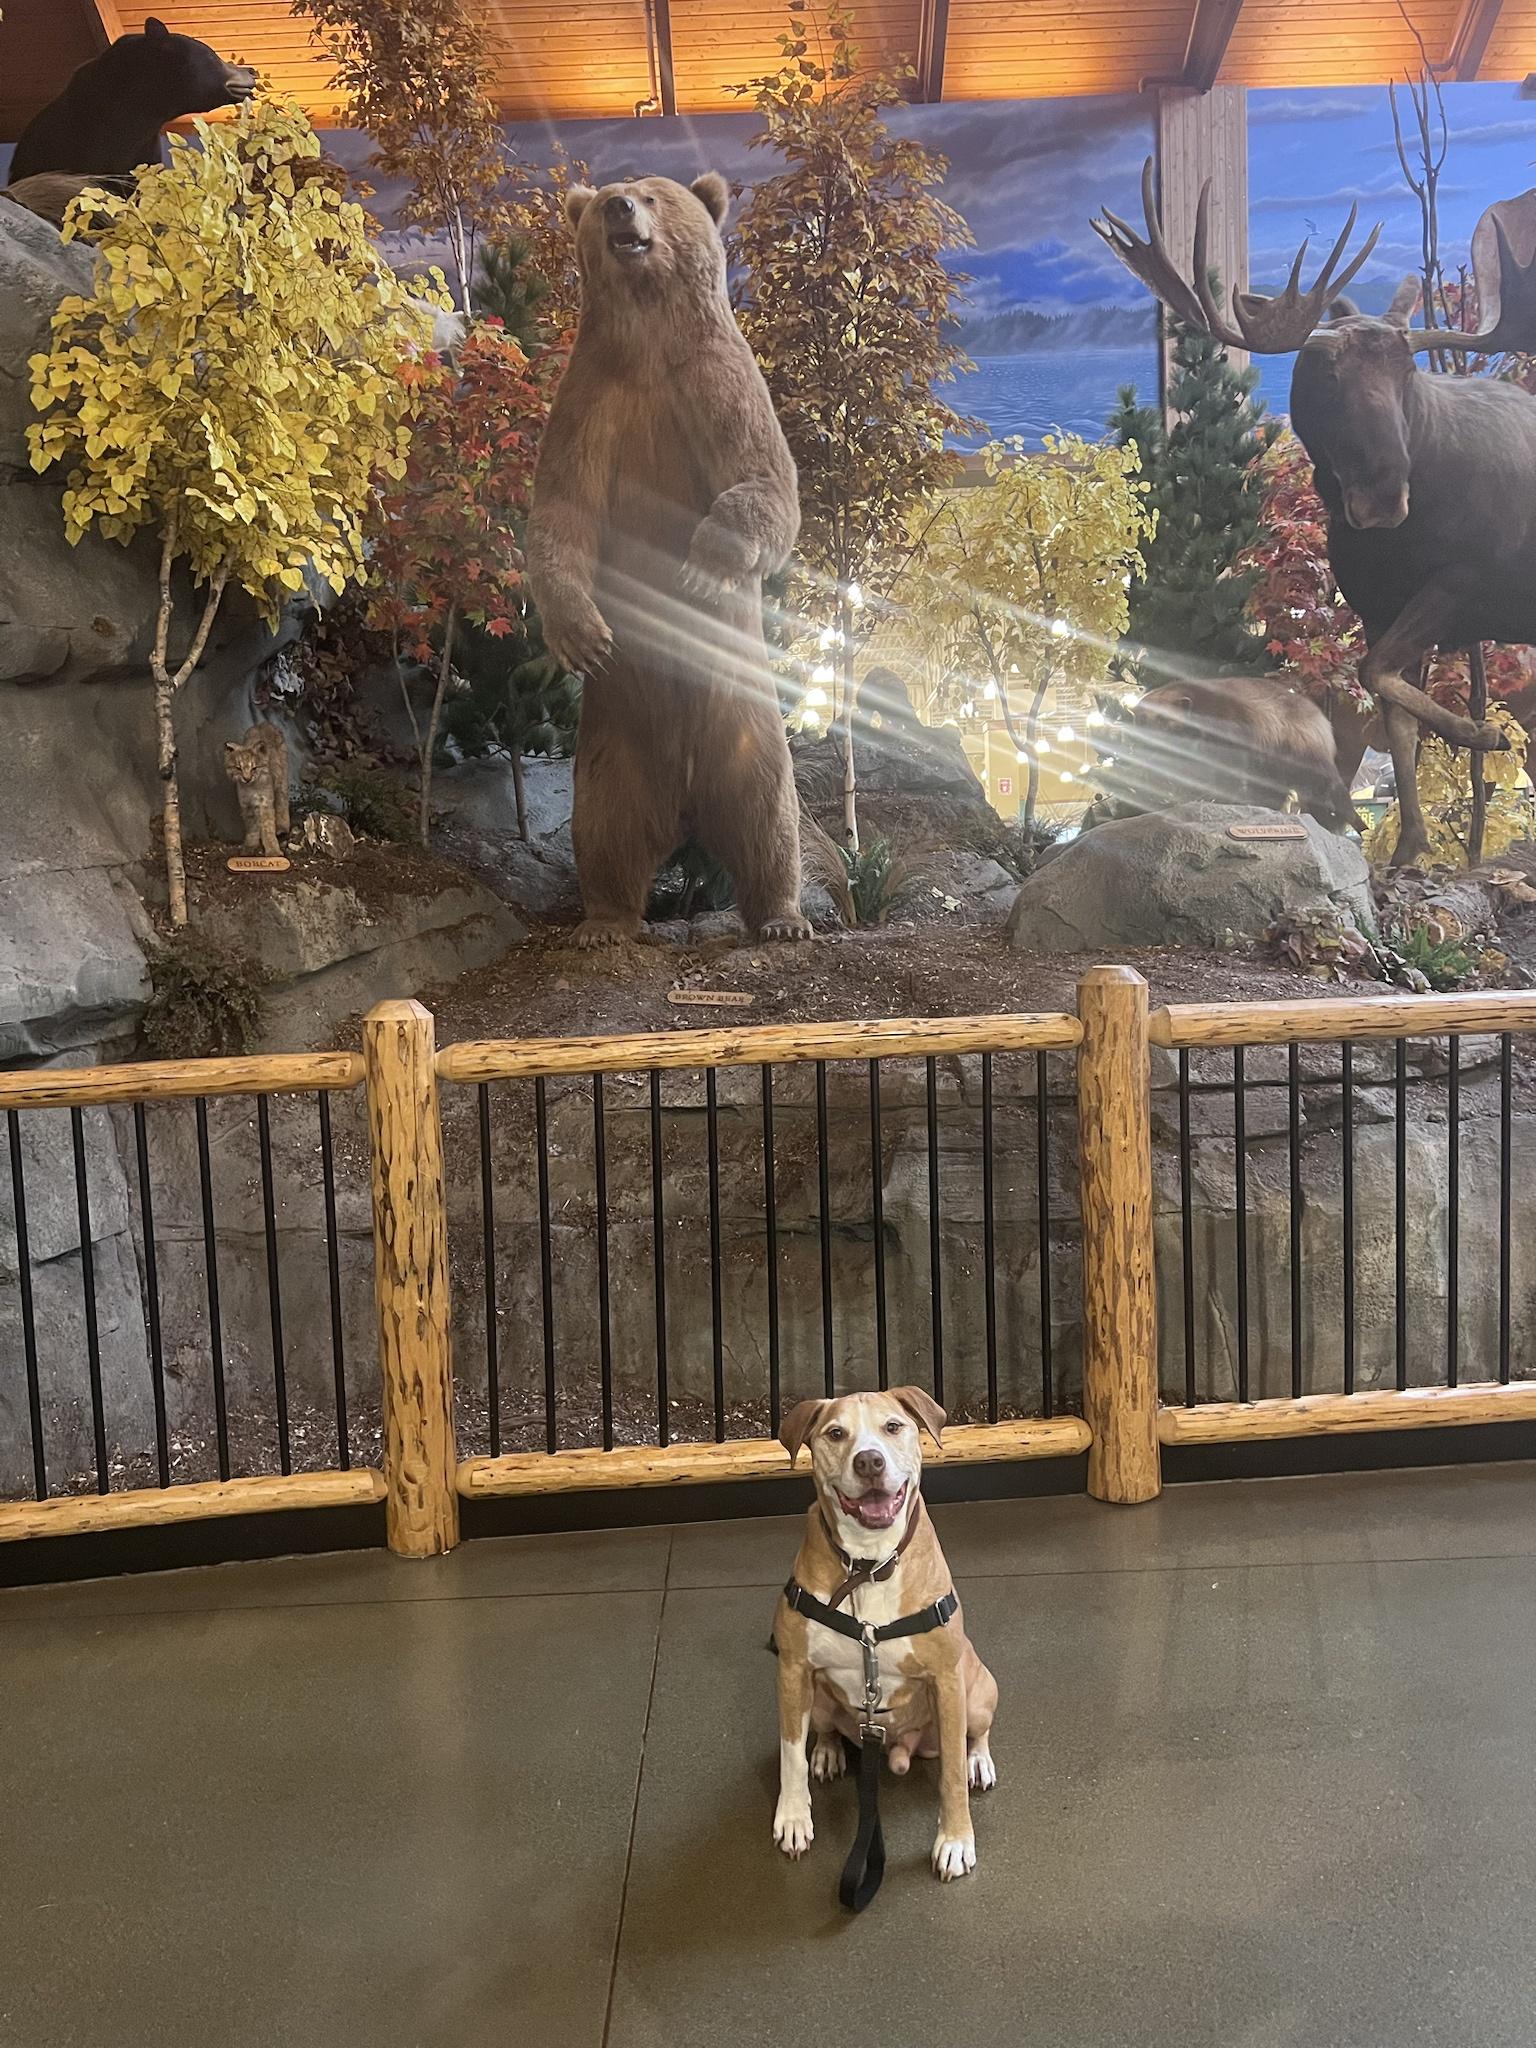 Took my canine to Cabela’s for his Tenth birthday.